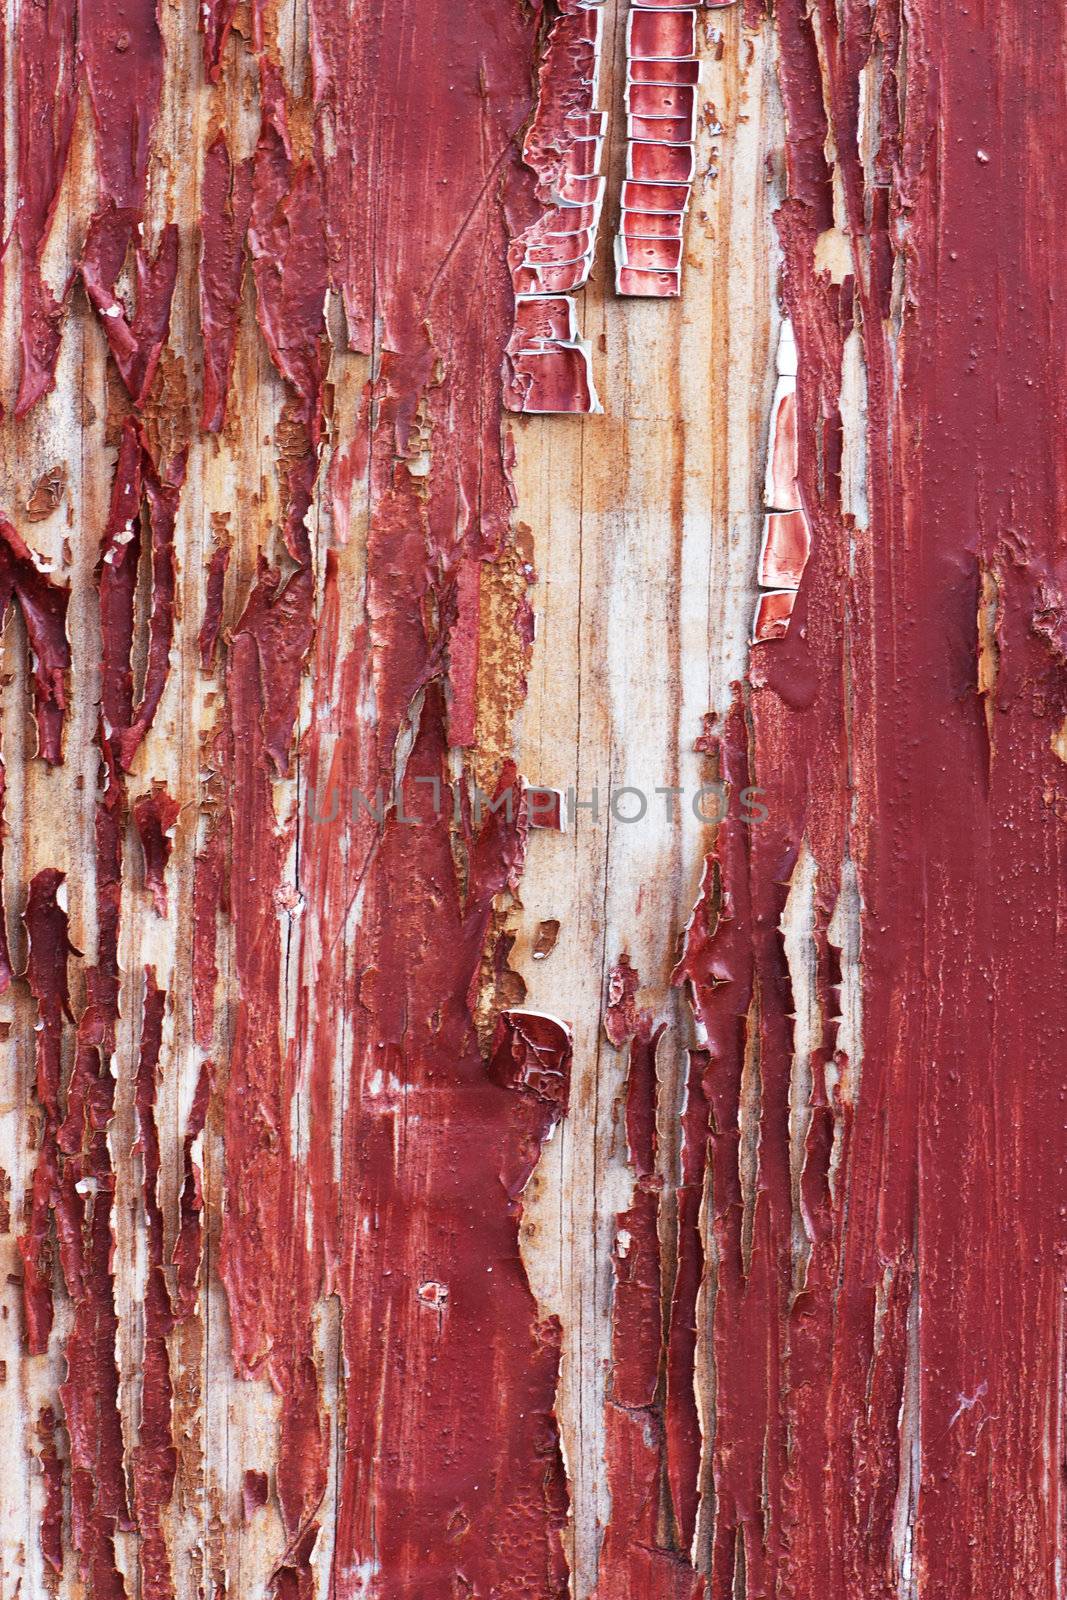 Peeling paint on an old wood wall